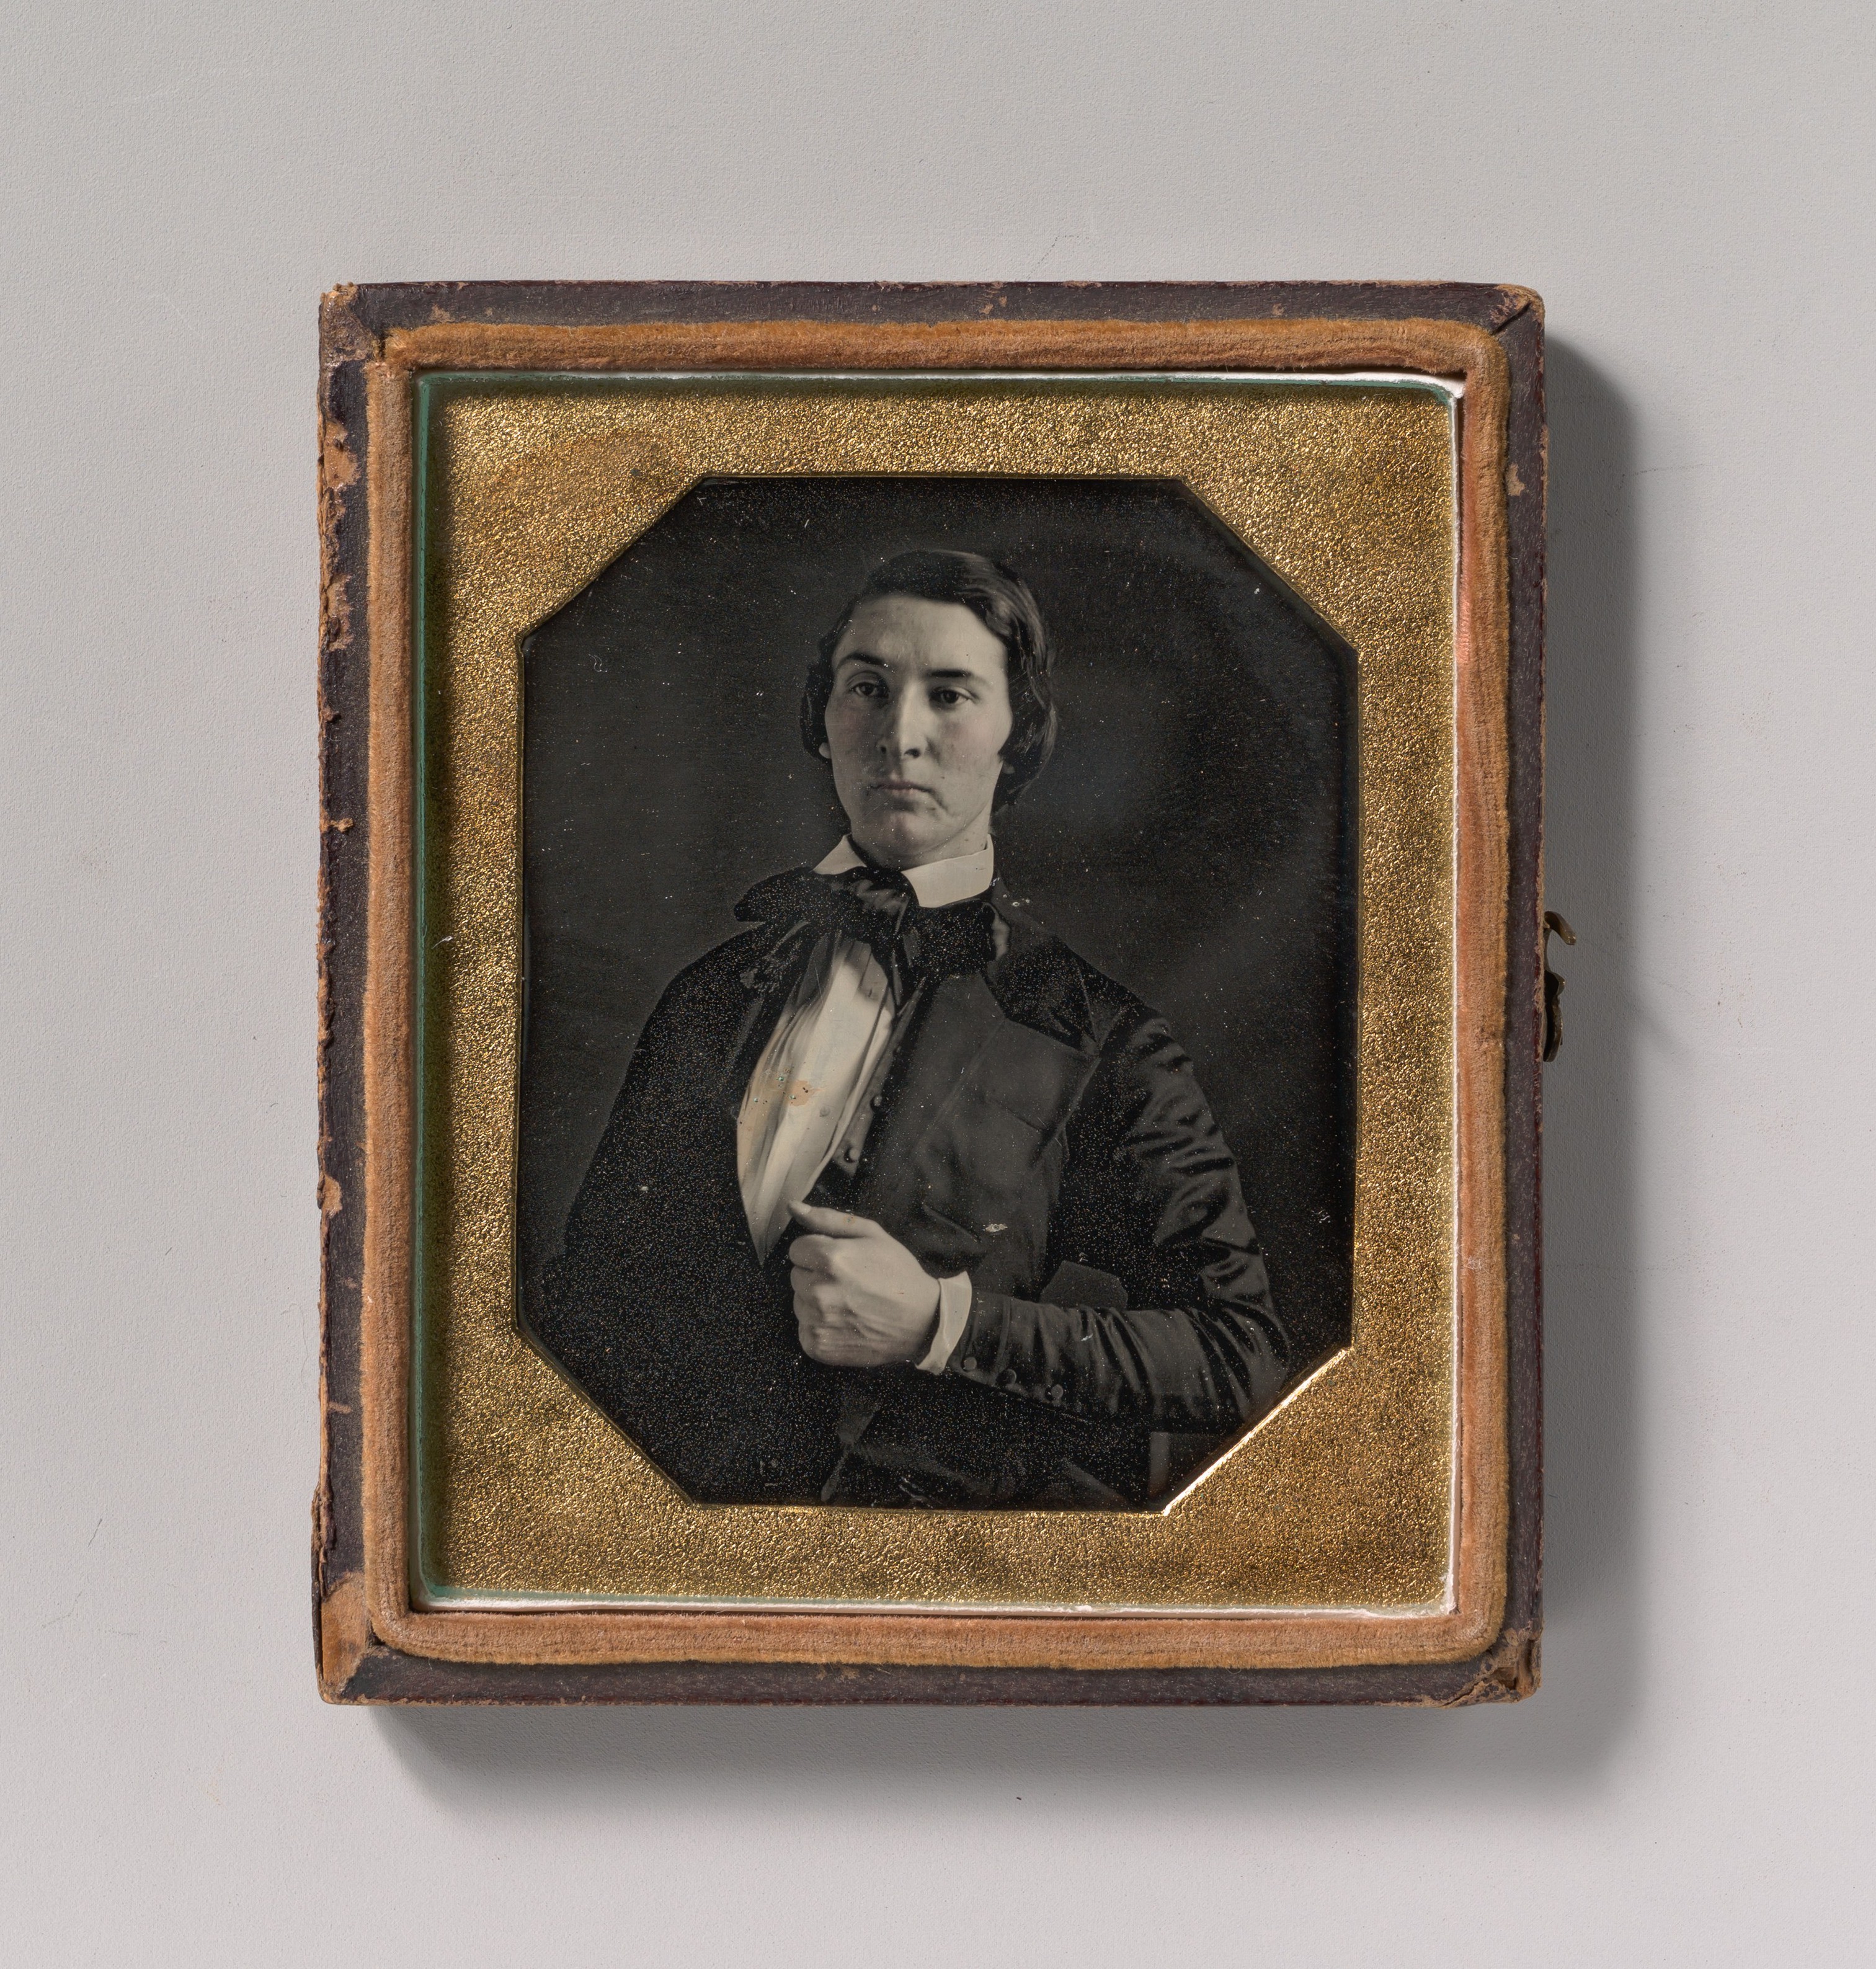 Unknown | [Young Man Holding Jacket Lapel] | The Metropolitan